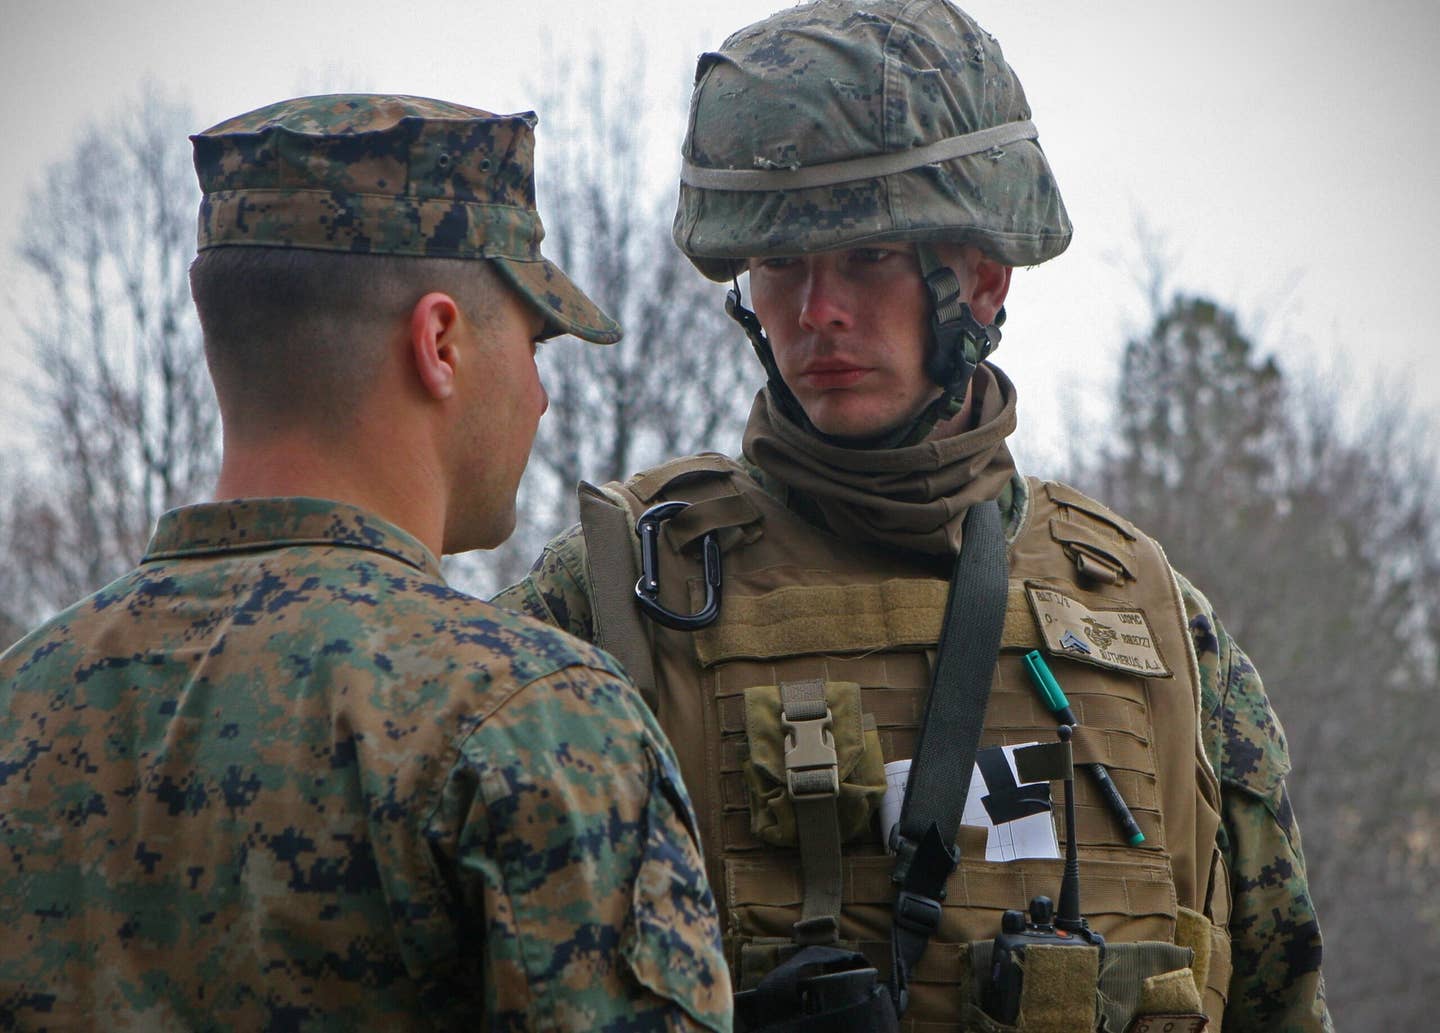 FORT PICKETT, VA - Sergeant Anthony V. Palmer (left), a squad leader with Company G, 2nd Battalion, 6th Marine Regiment, 2nd Marine Division, speaks with Cpl. Adam J. Butherus, a squad leader with Company B, 1st Battalion, 9th Marine Regiment, 2nd Marine Division, before a patrol. (USMC photo)